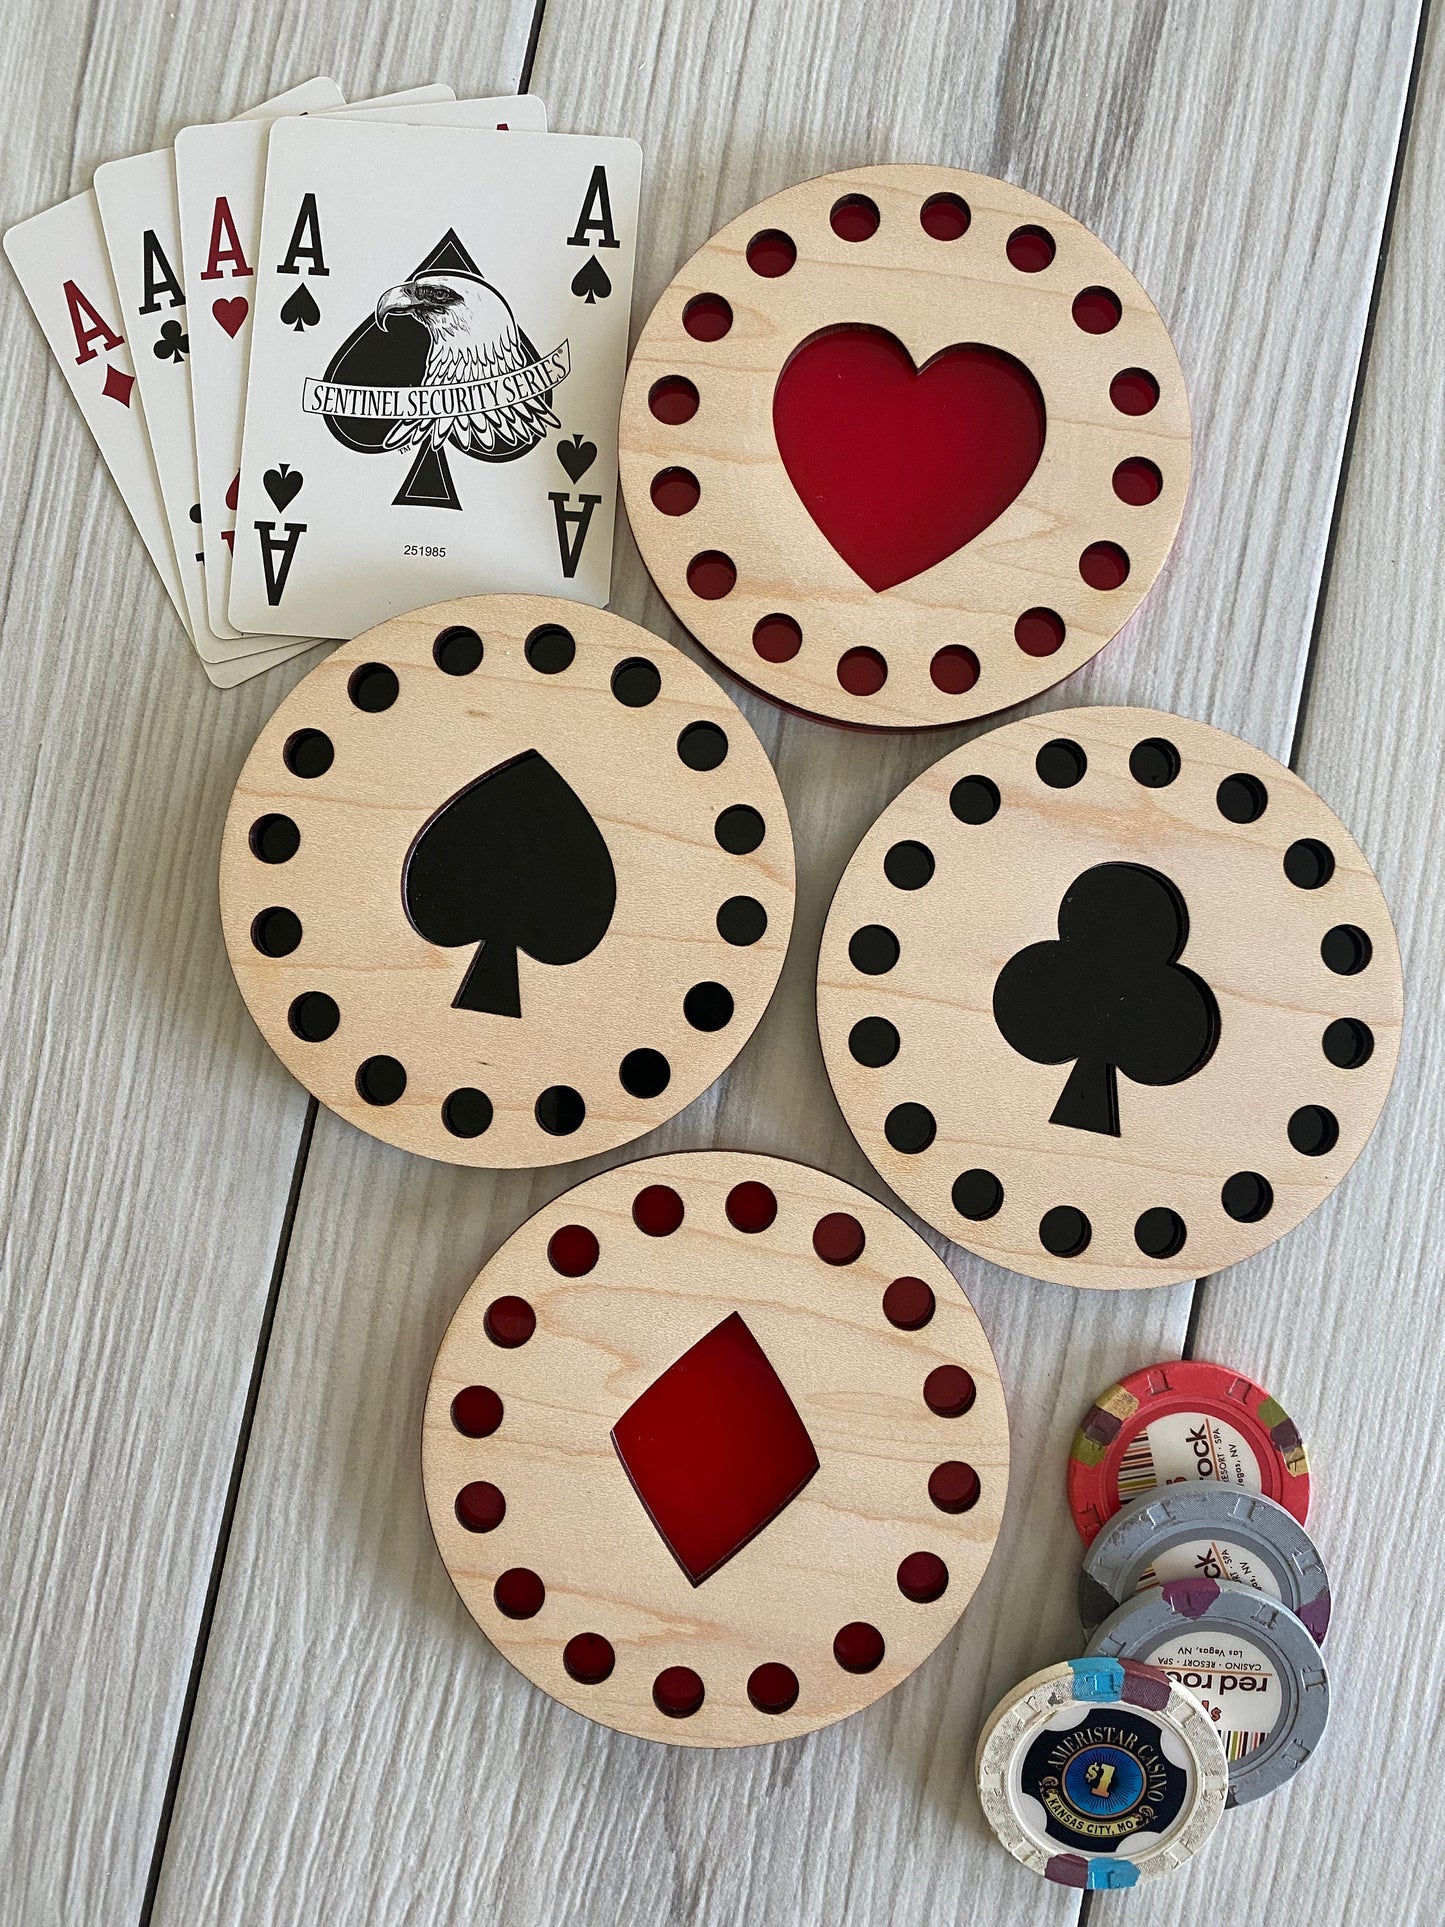 Casino - Game Night - Man Cave - Poker Card Coasters - Bar Coasters - Game Room Decor - Game Night - Gifts for Men - Drink Coaster Set